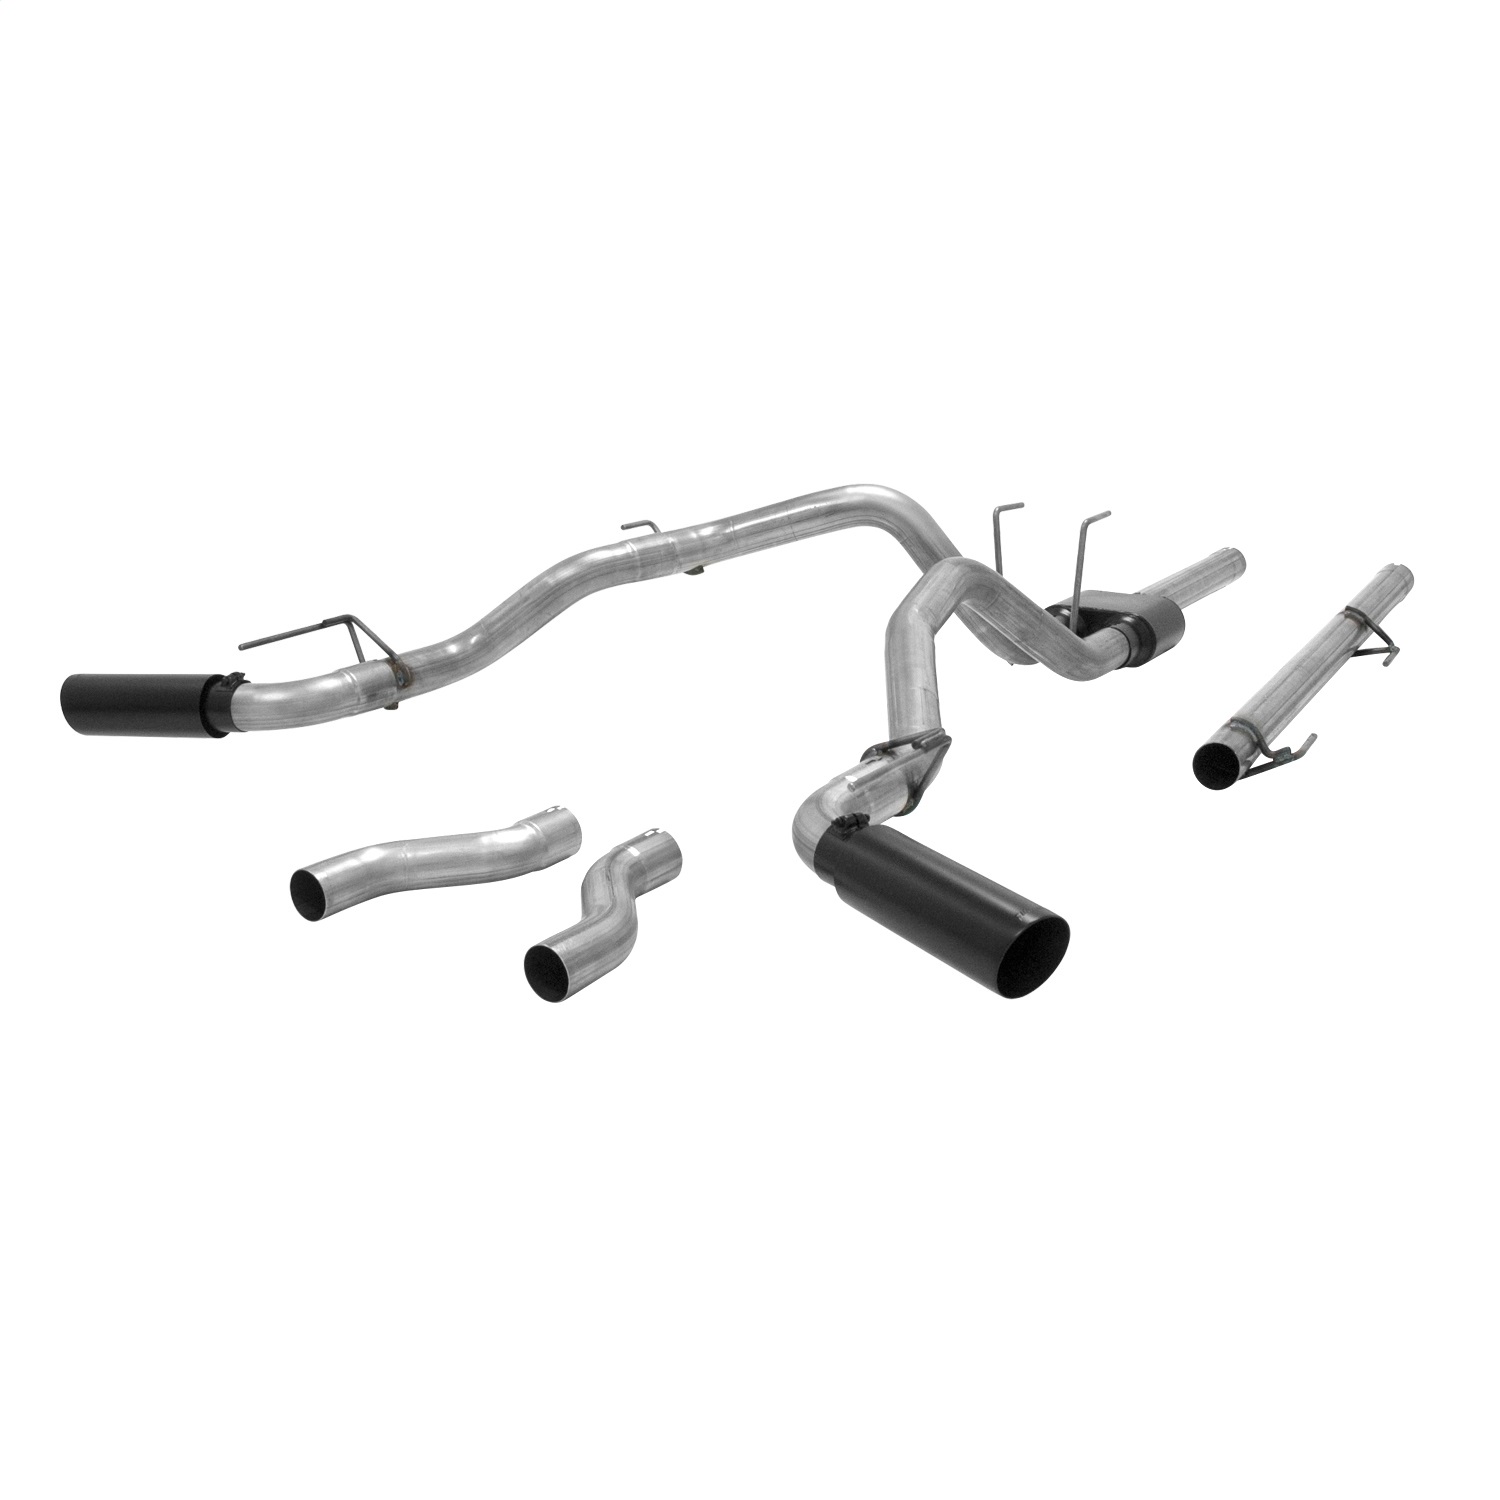 Flowmaster Flowmaster 817690 Outlaw Series Cat Back Exhaust System Fits 1500 Ram 1500